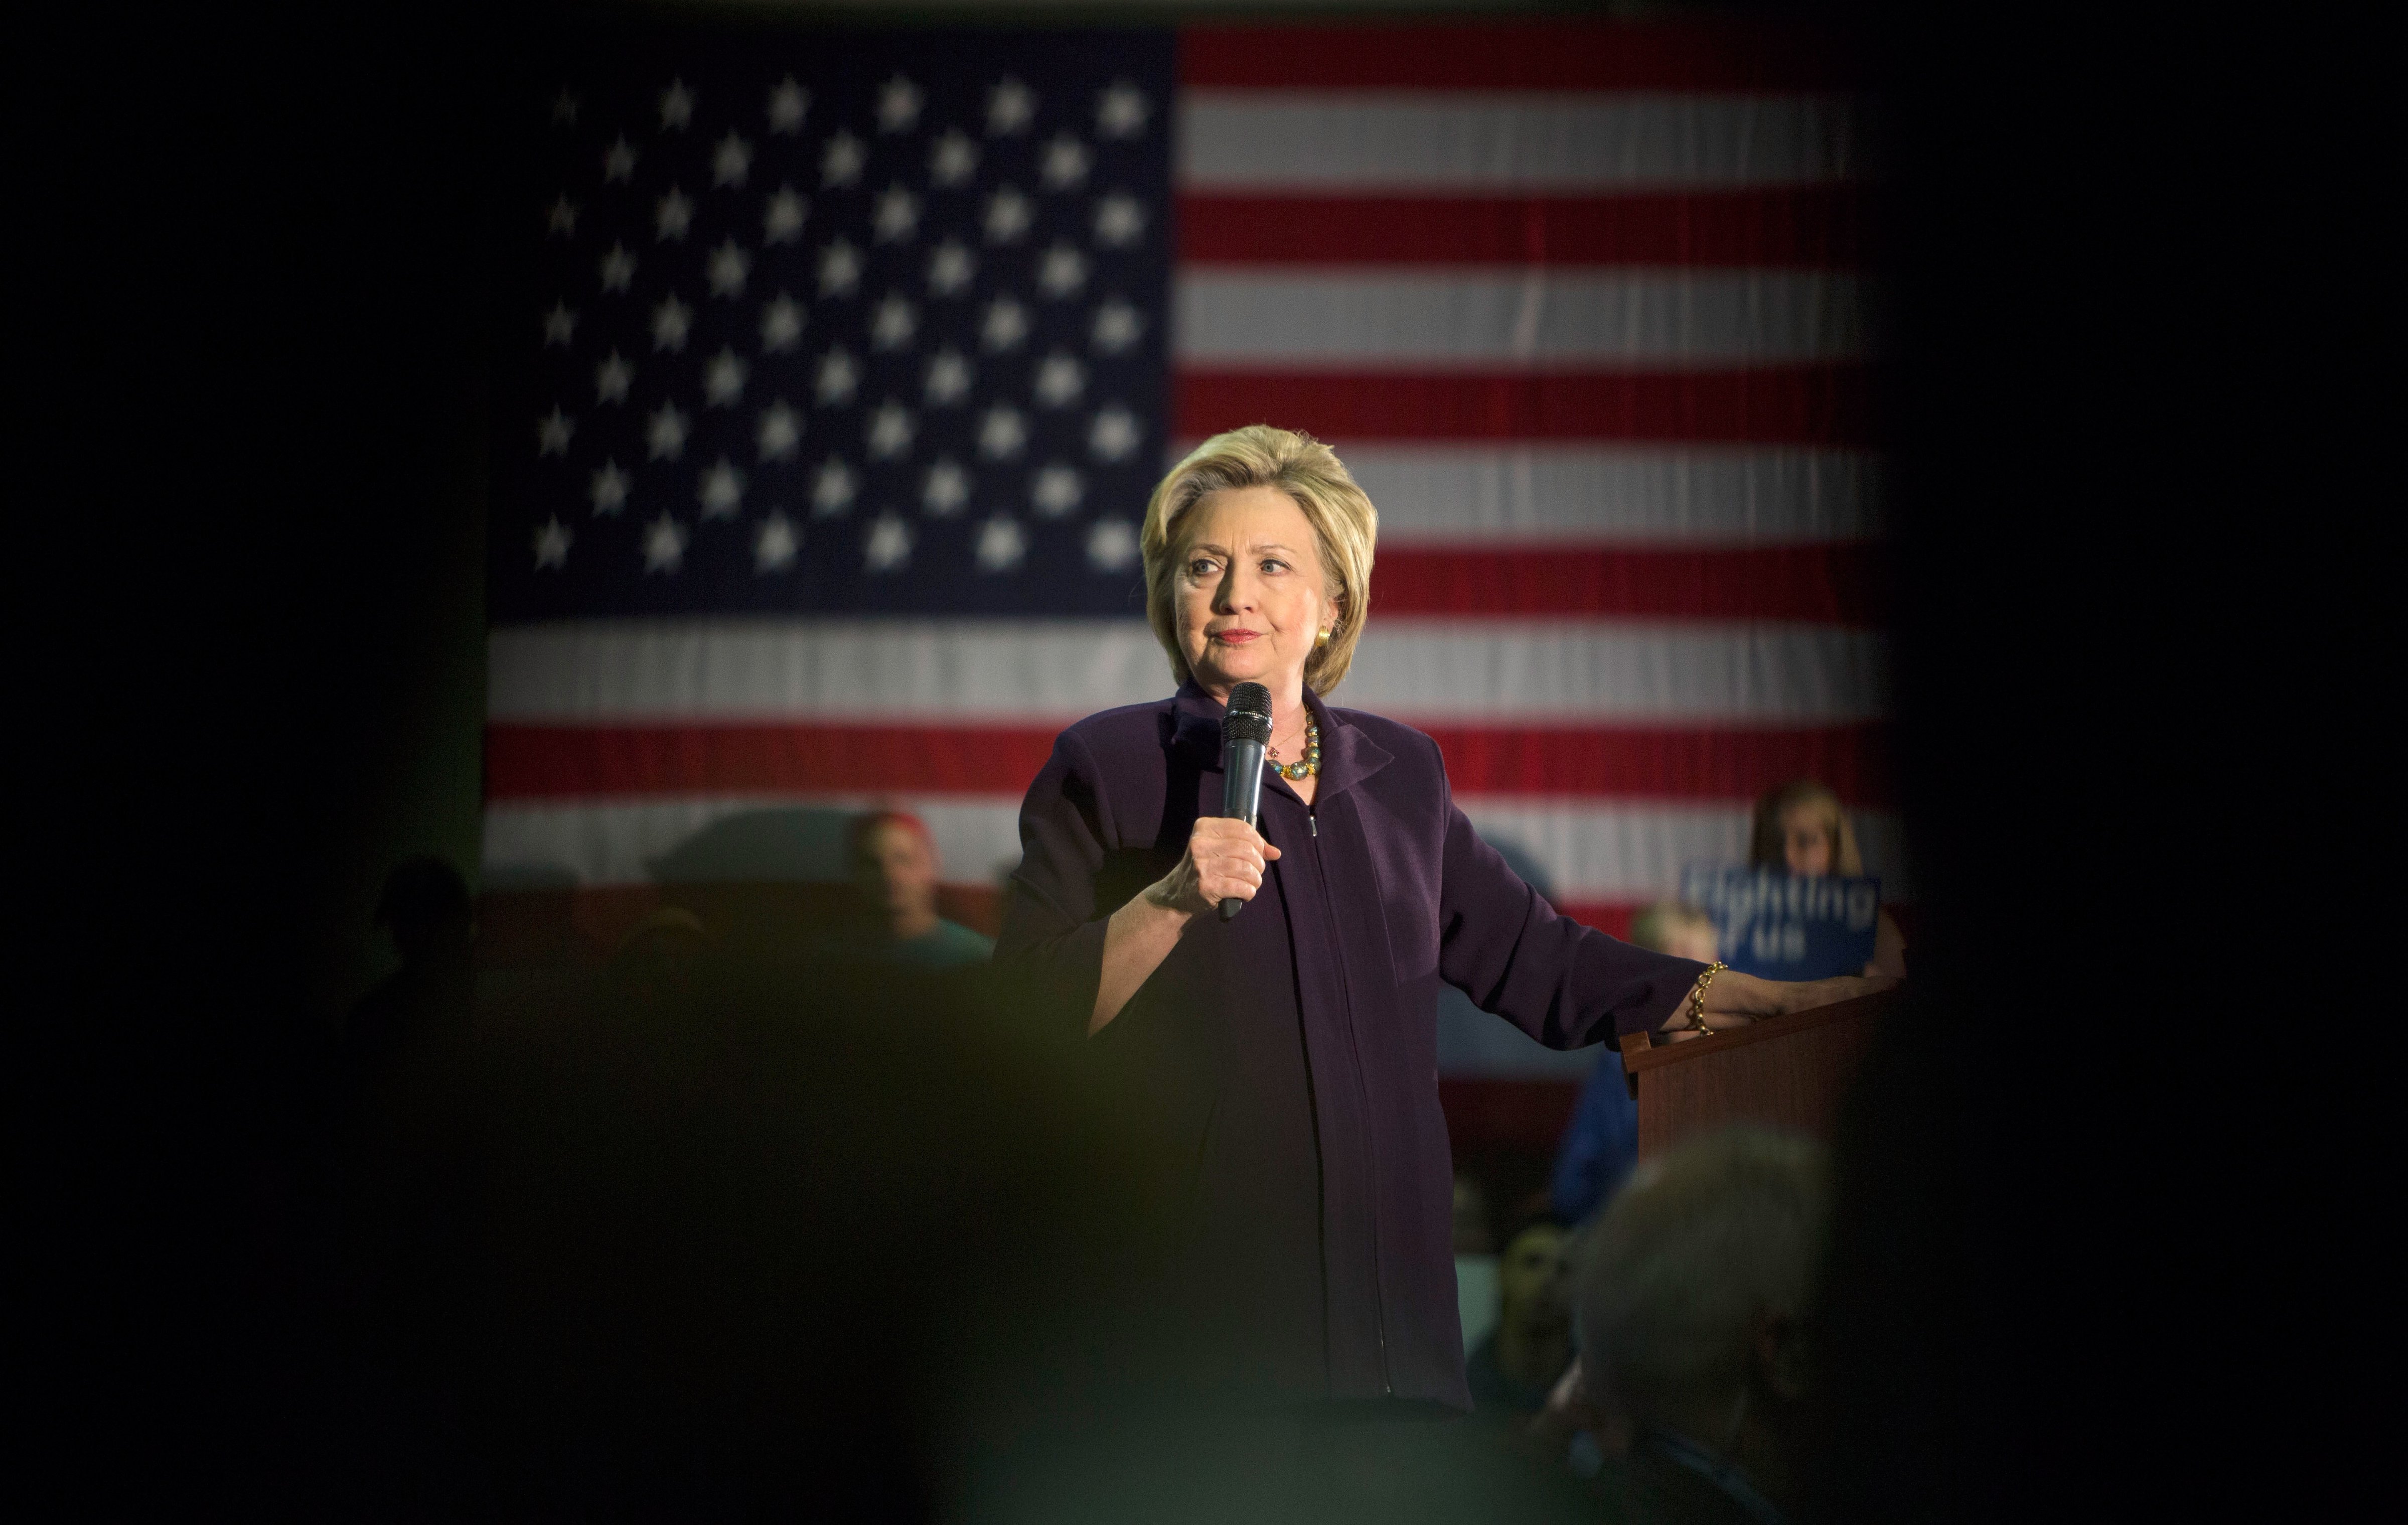 Democratic presidential candidate  Hillary Clinton  speaks at a campaign event at Camden County College on May 11, 2016 in Blackwood, New Jersey. (Jessica Kourkounis—Getty Images)